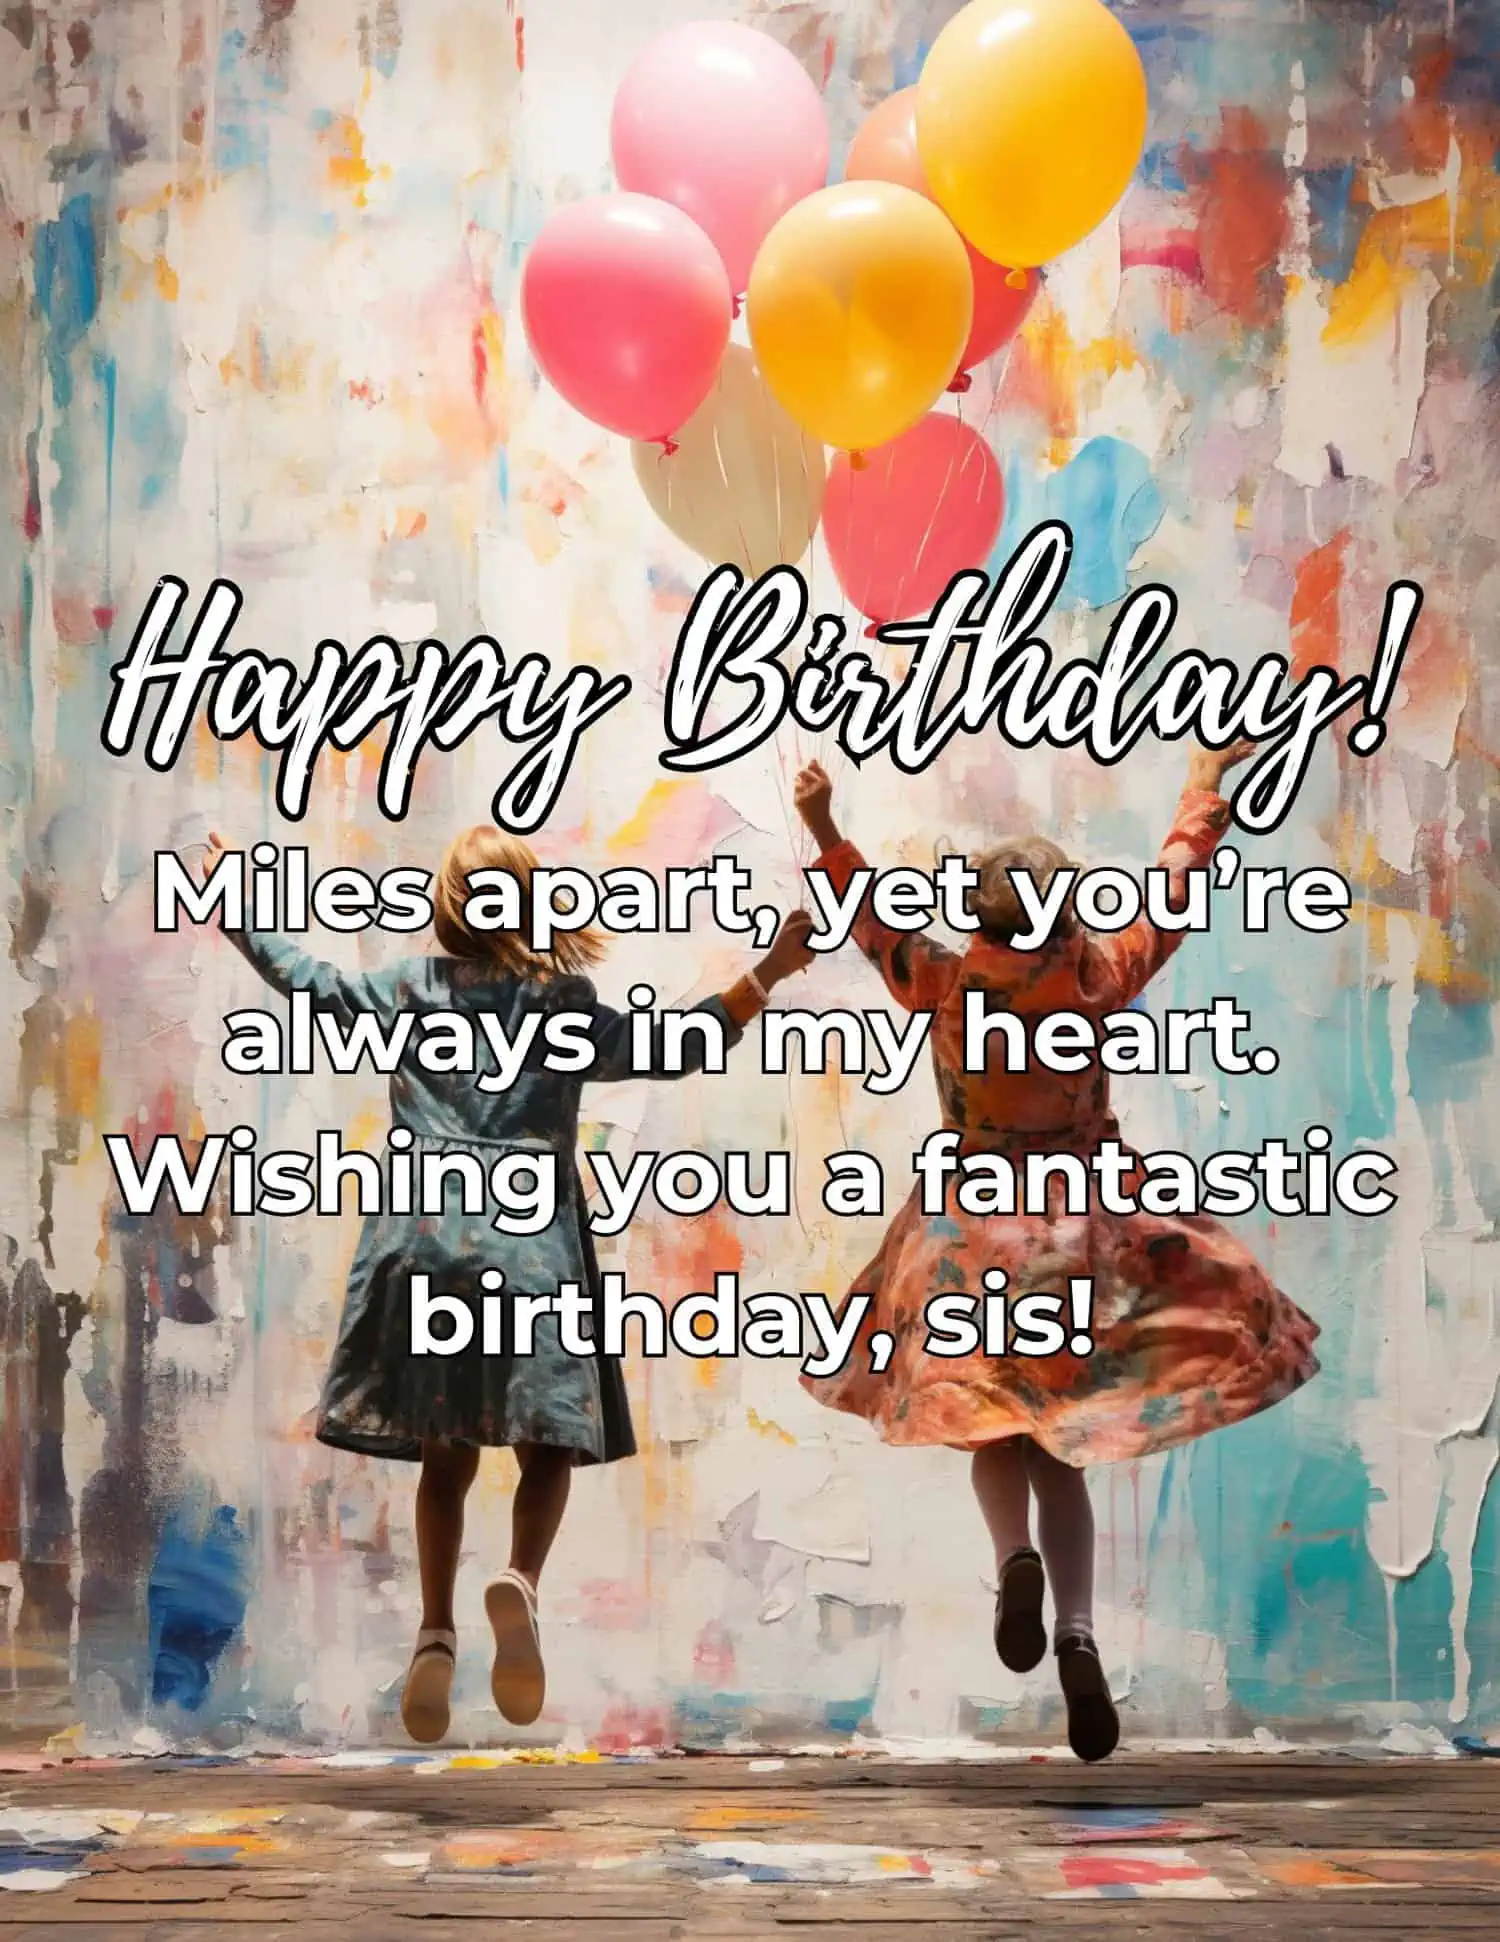 A collection of heartfelt birthday wishes dedicated to sisters who are miles apart.